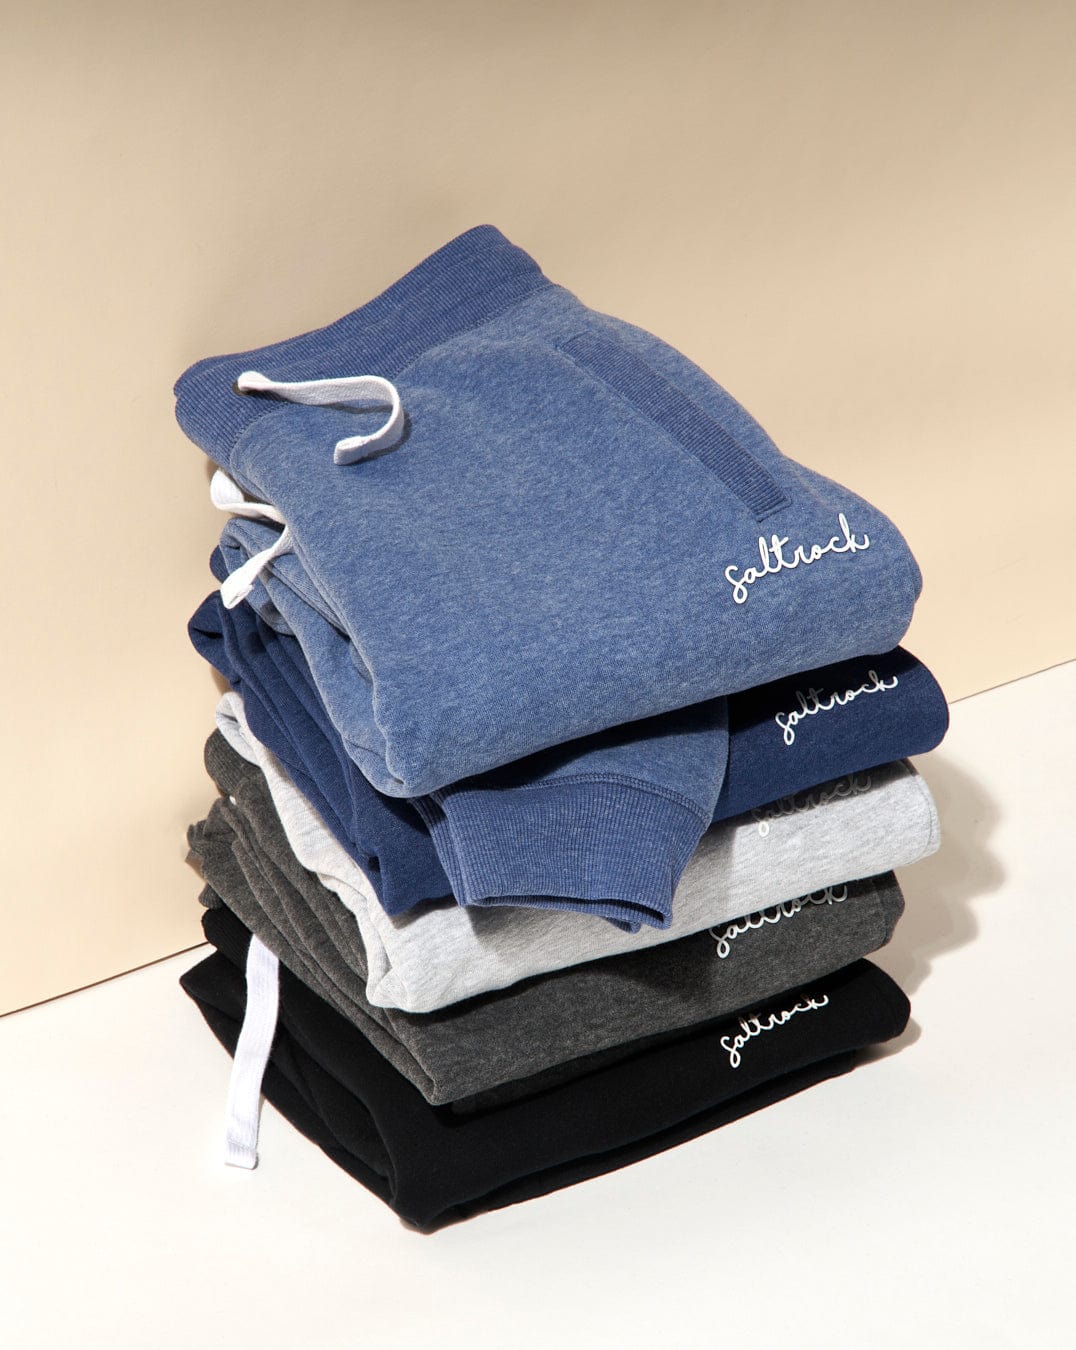 A stack of neatly folded Velator - Womens Joggers in varying shades of blue and gray featuring Saltrock branding.